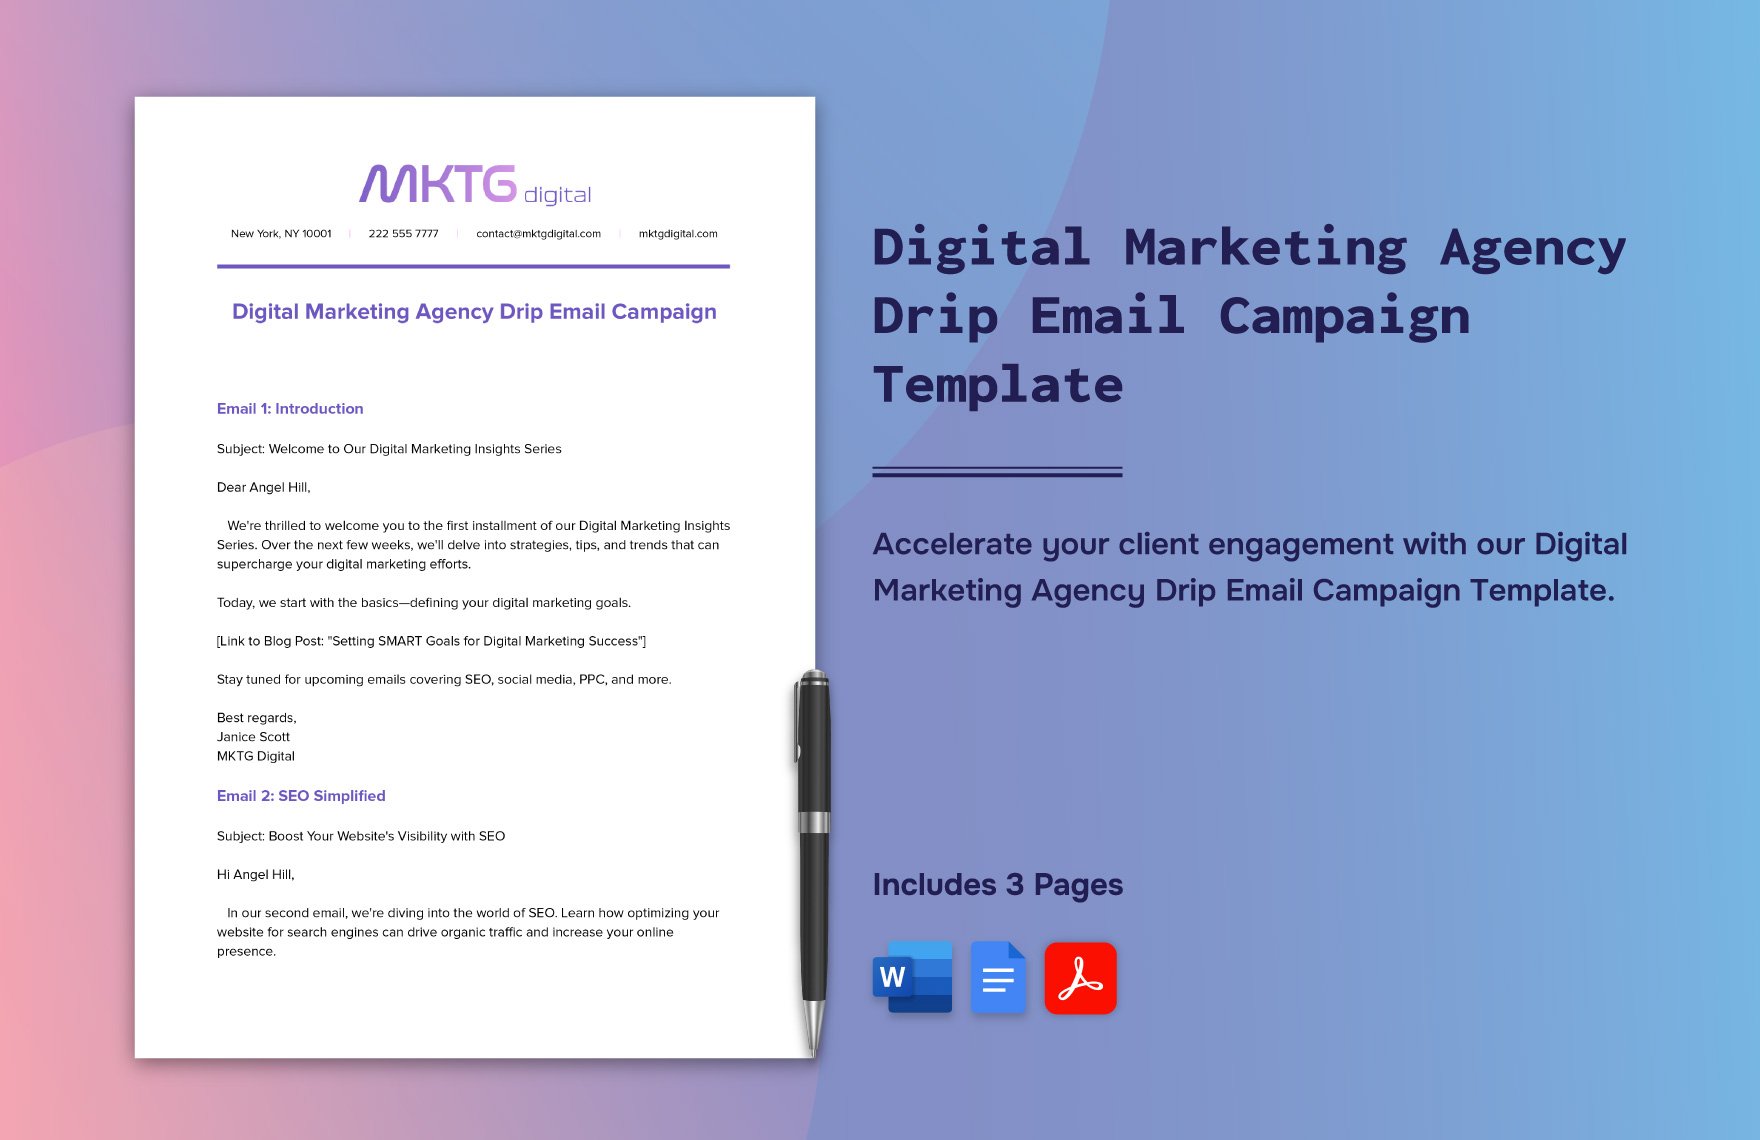 Digital Marketing Agency Drip Email Campaign Template